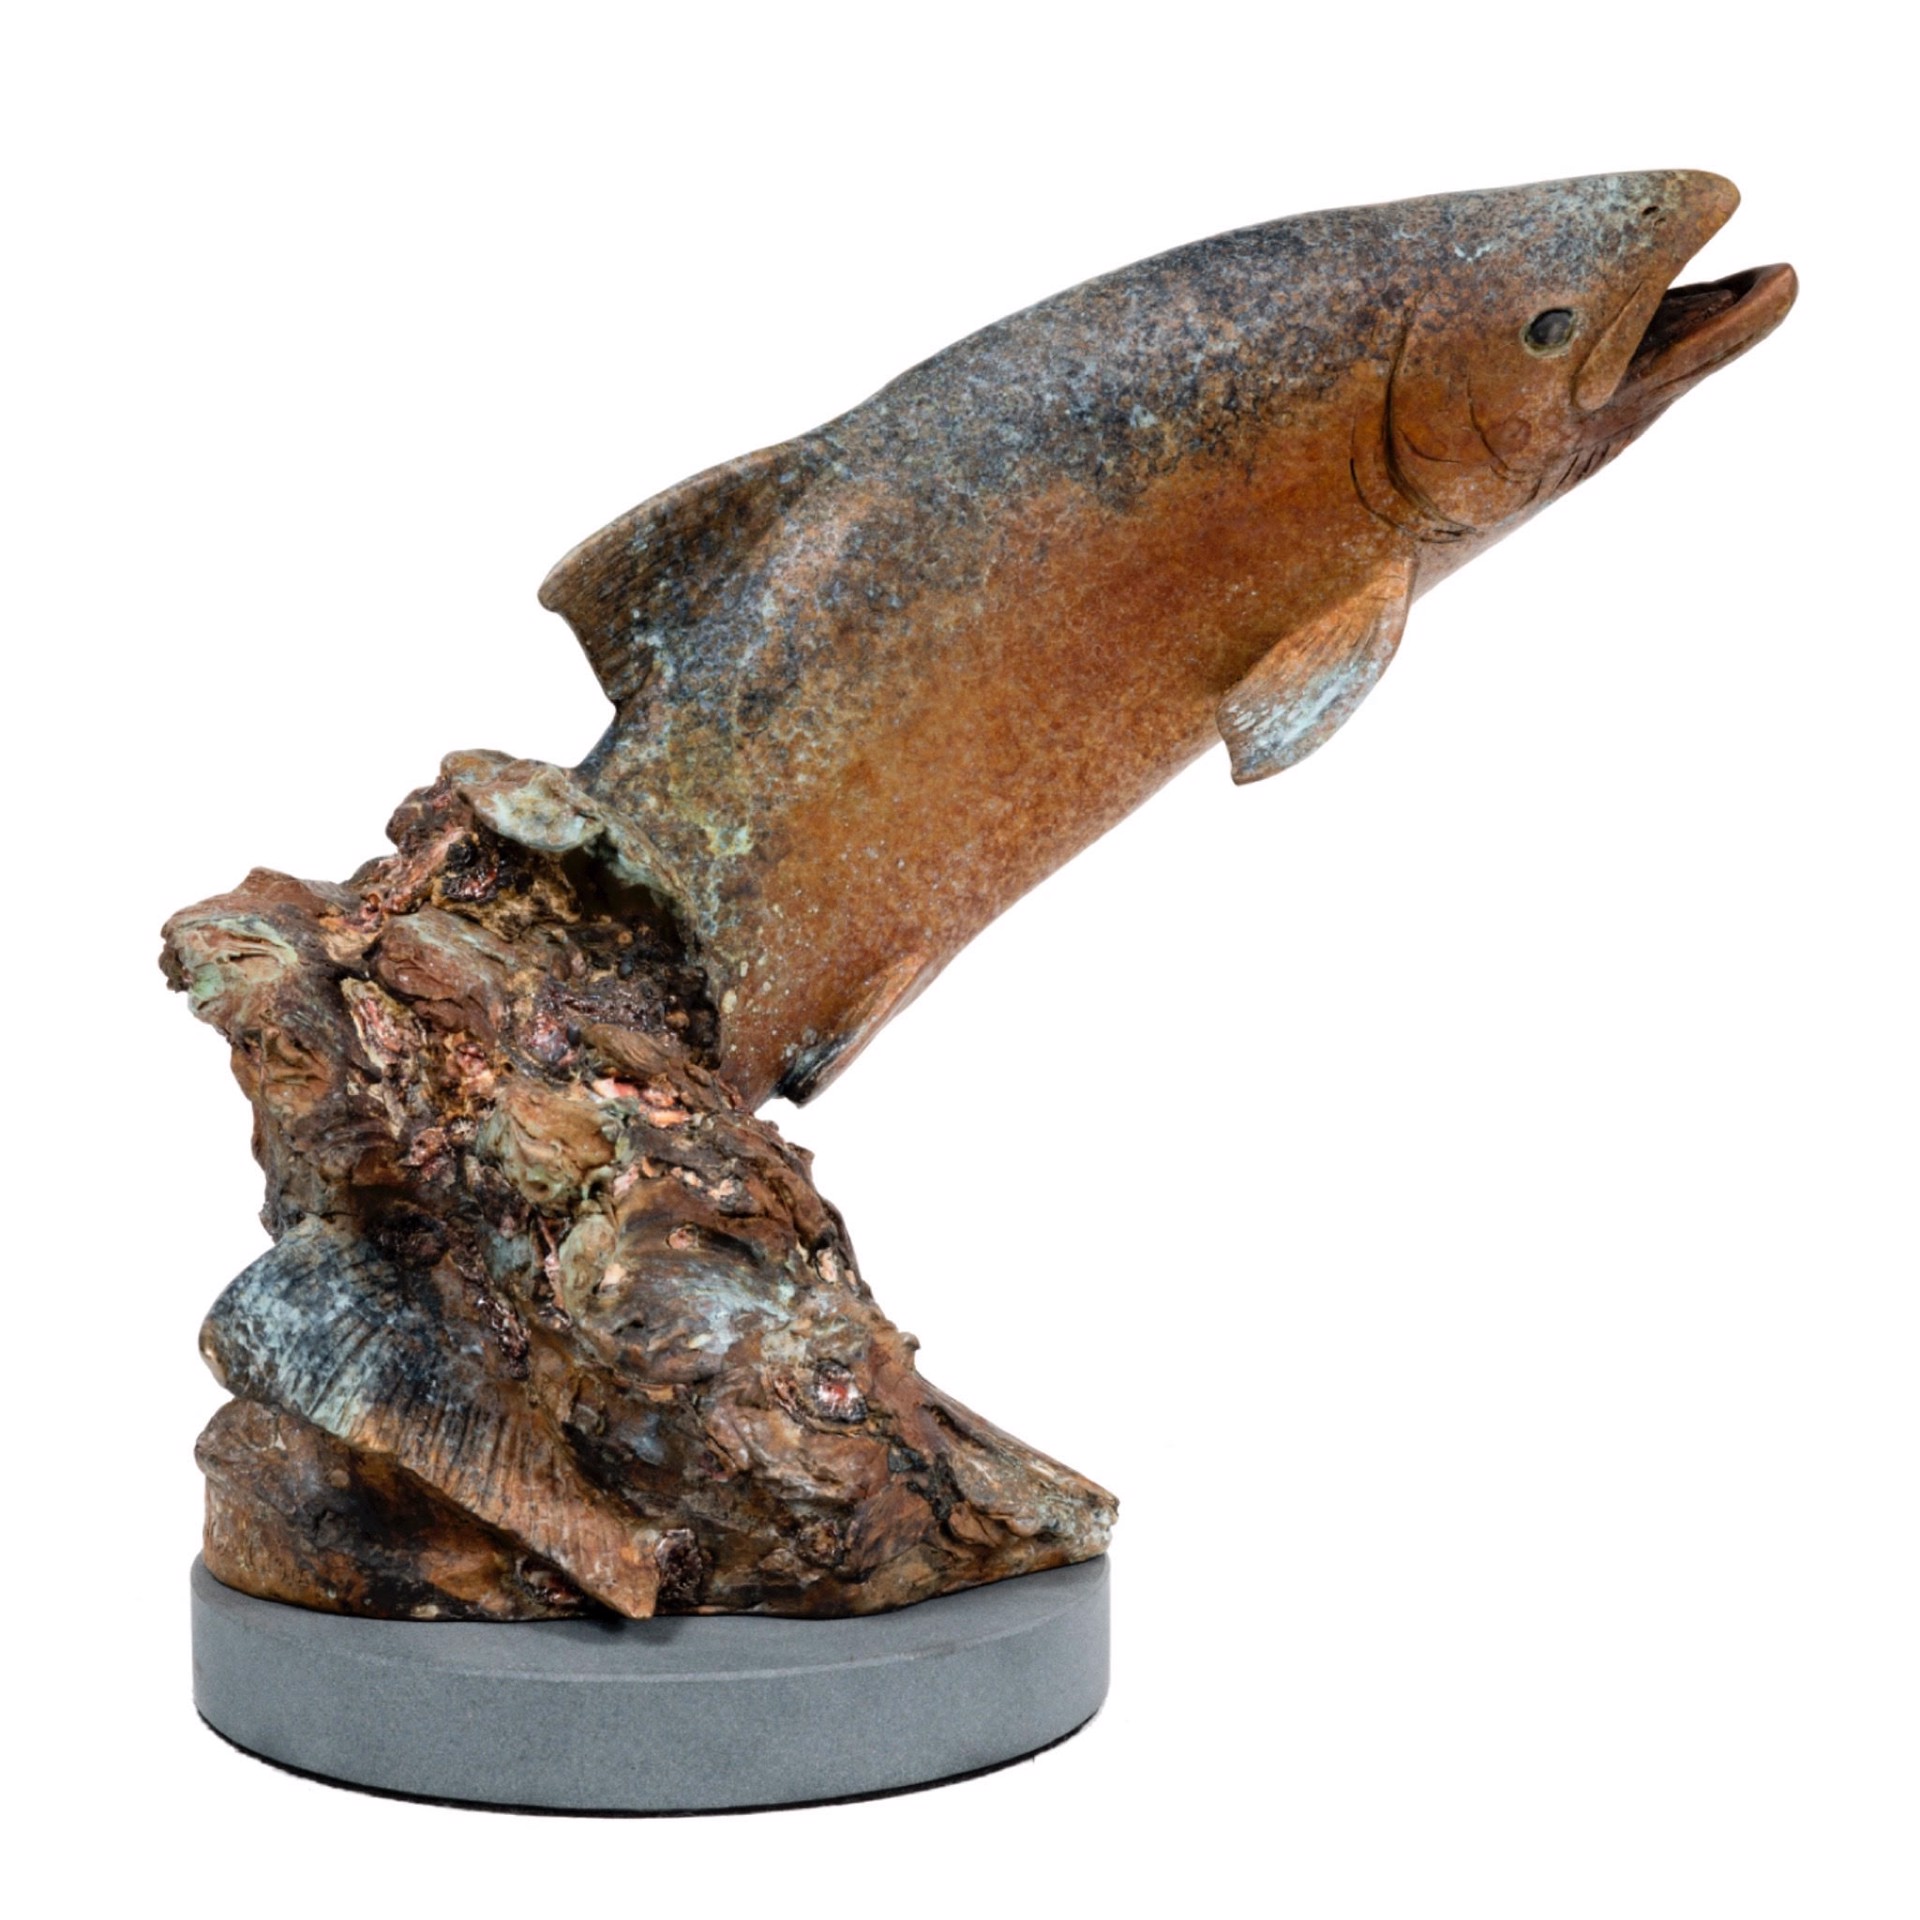 Trout Original Bronze Sculpture by Rip and Alison Caswell, Contemporary Fine Art, Modern Wildlife Art, Available At Gallery Wild